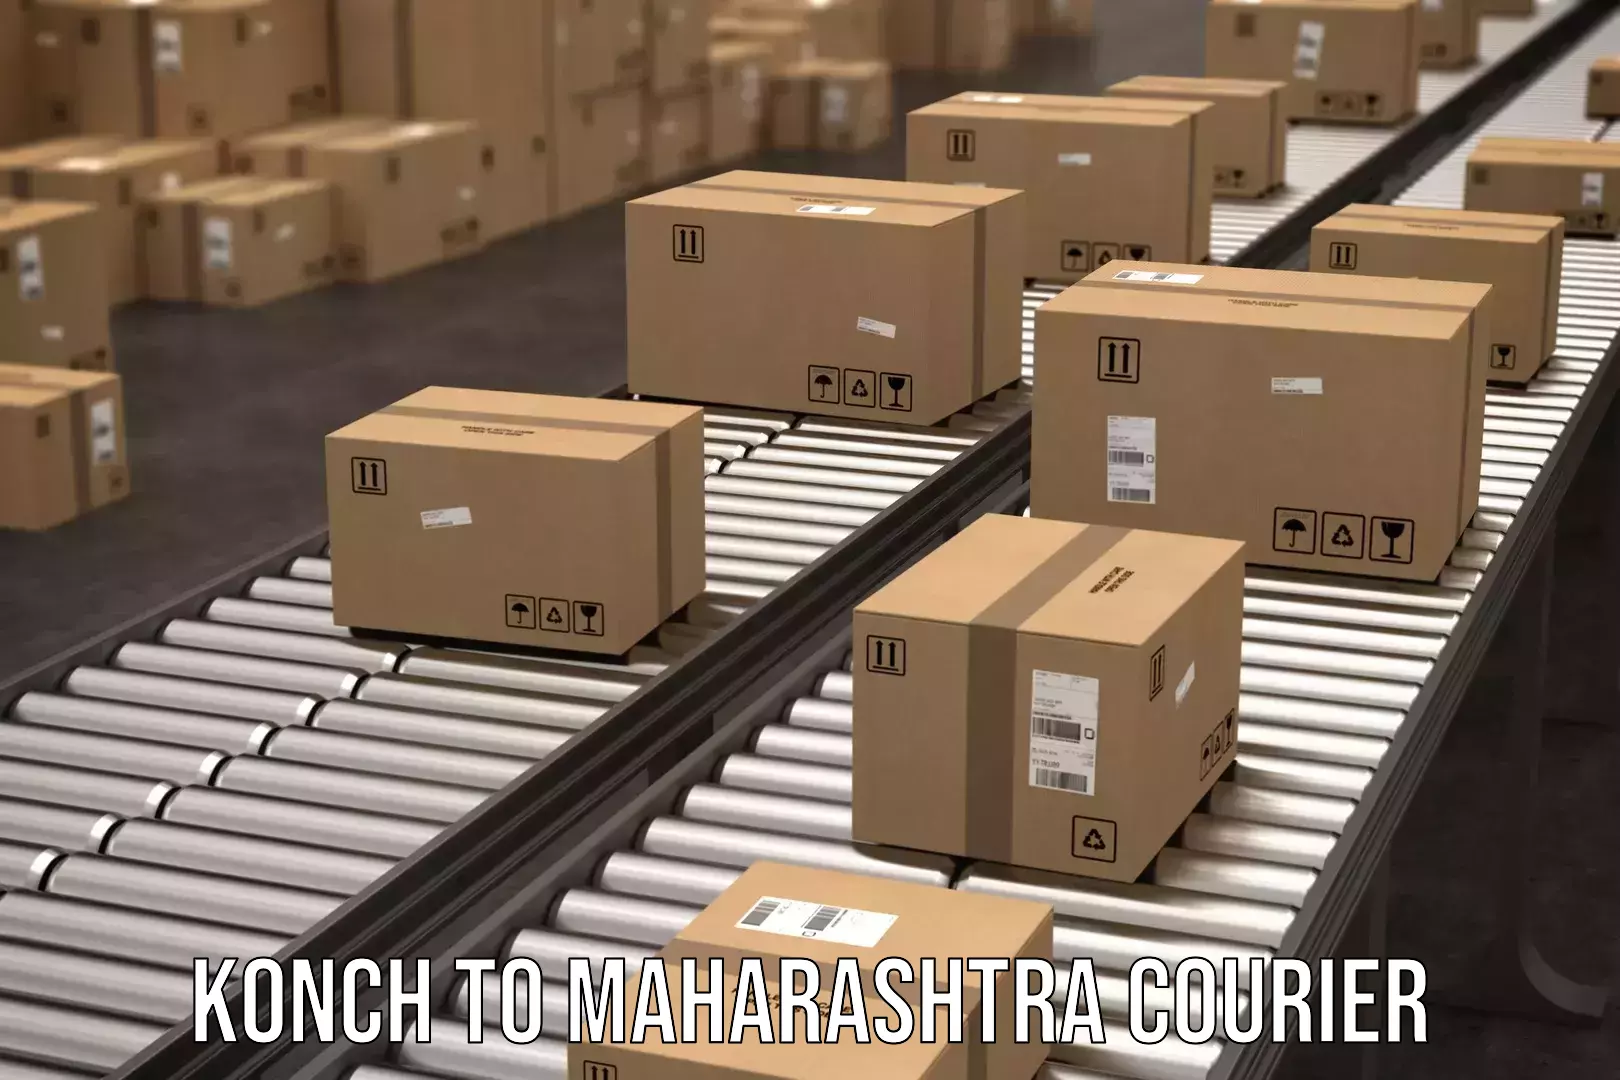 Package delivery network Konch to Maharashtra